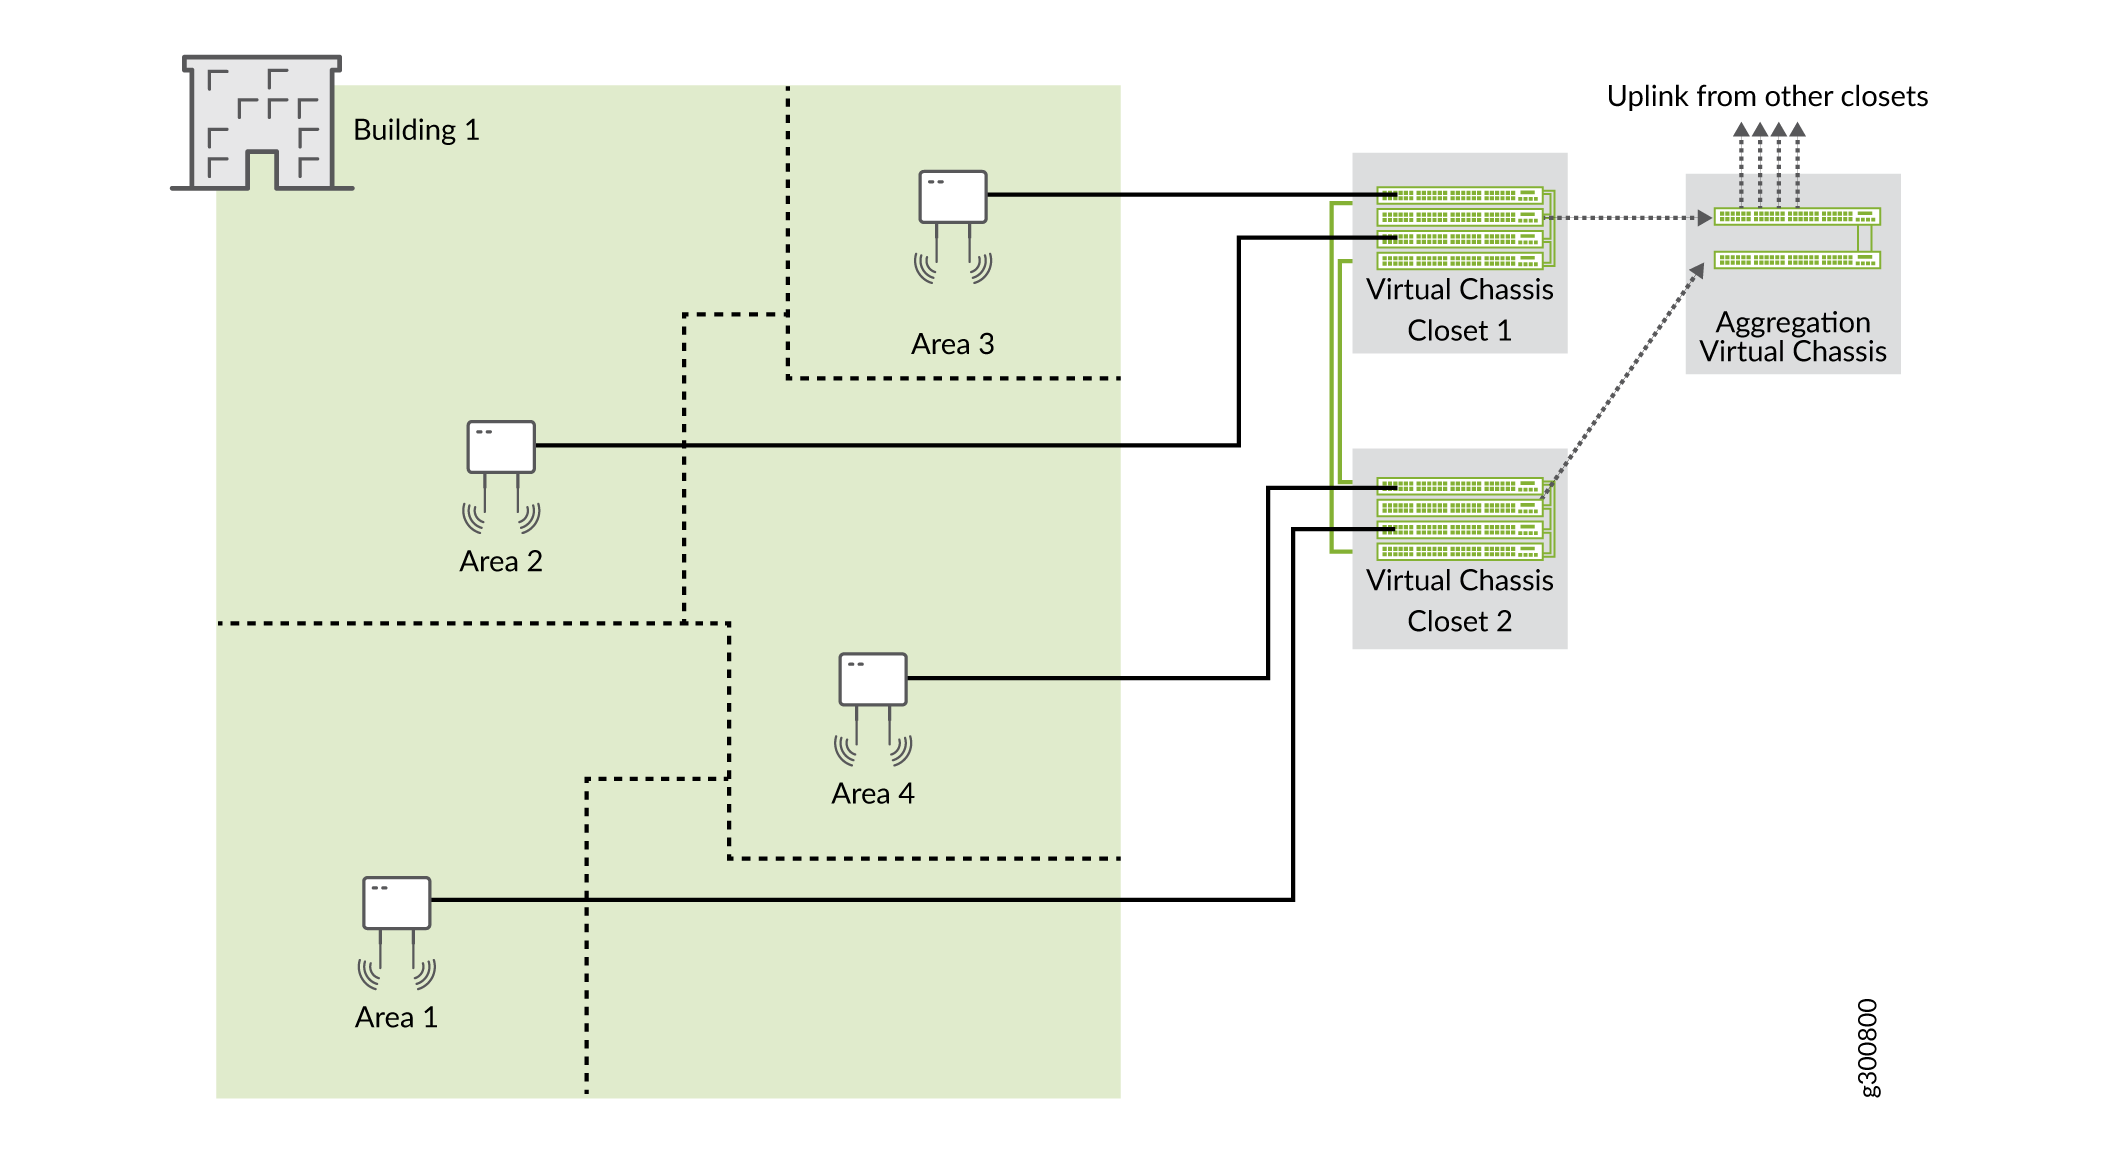 Virtual Chassis Setup in a NOC